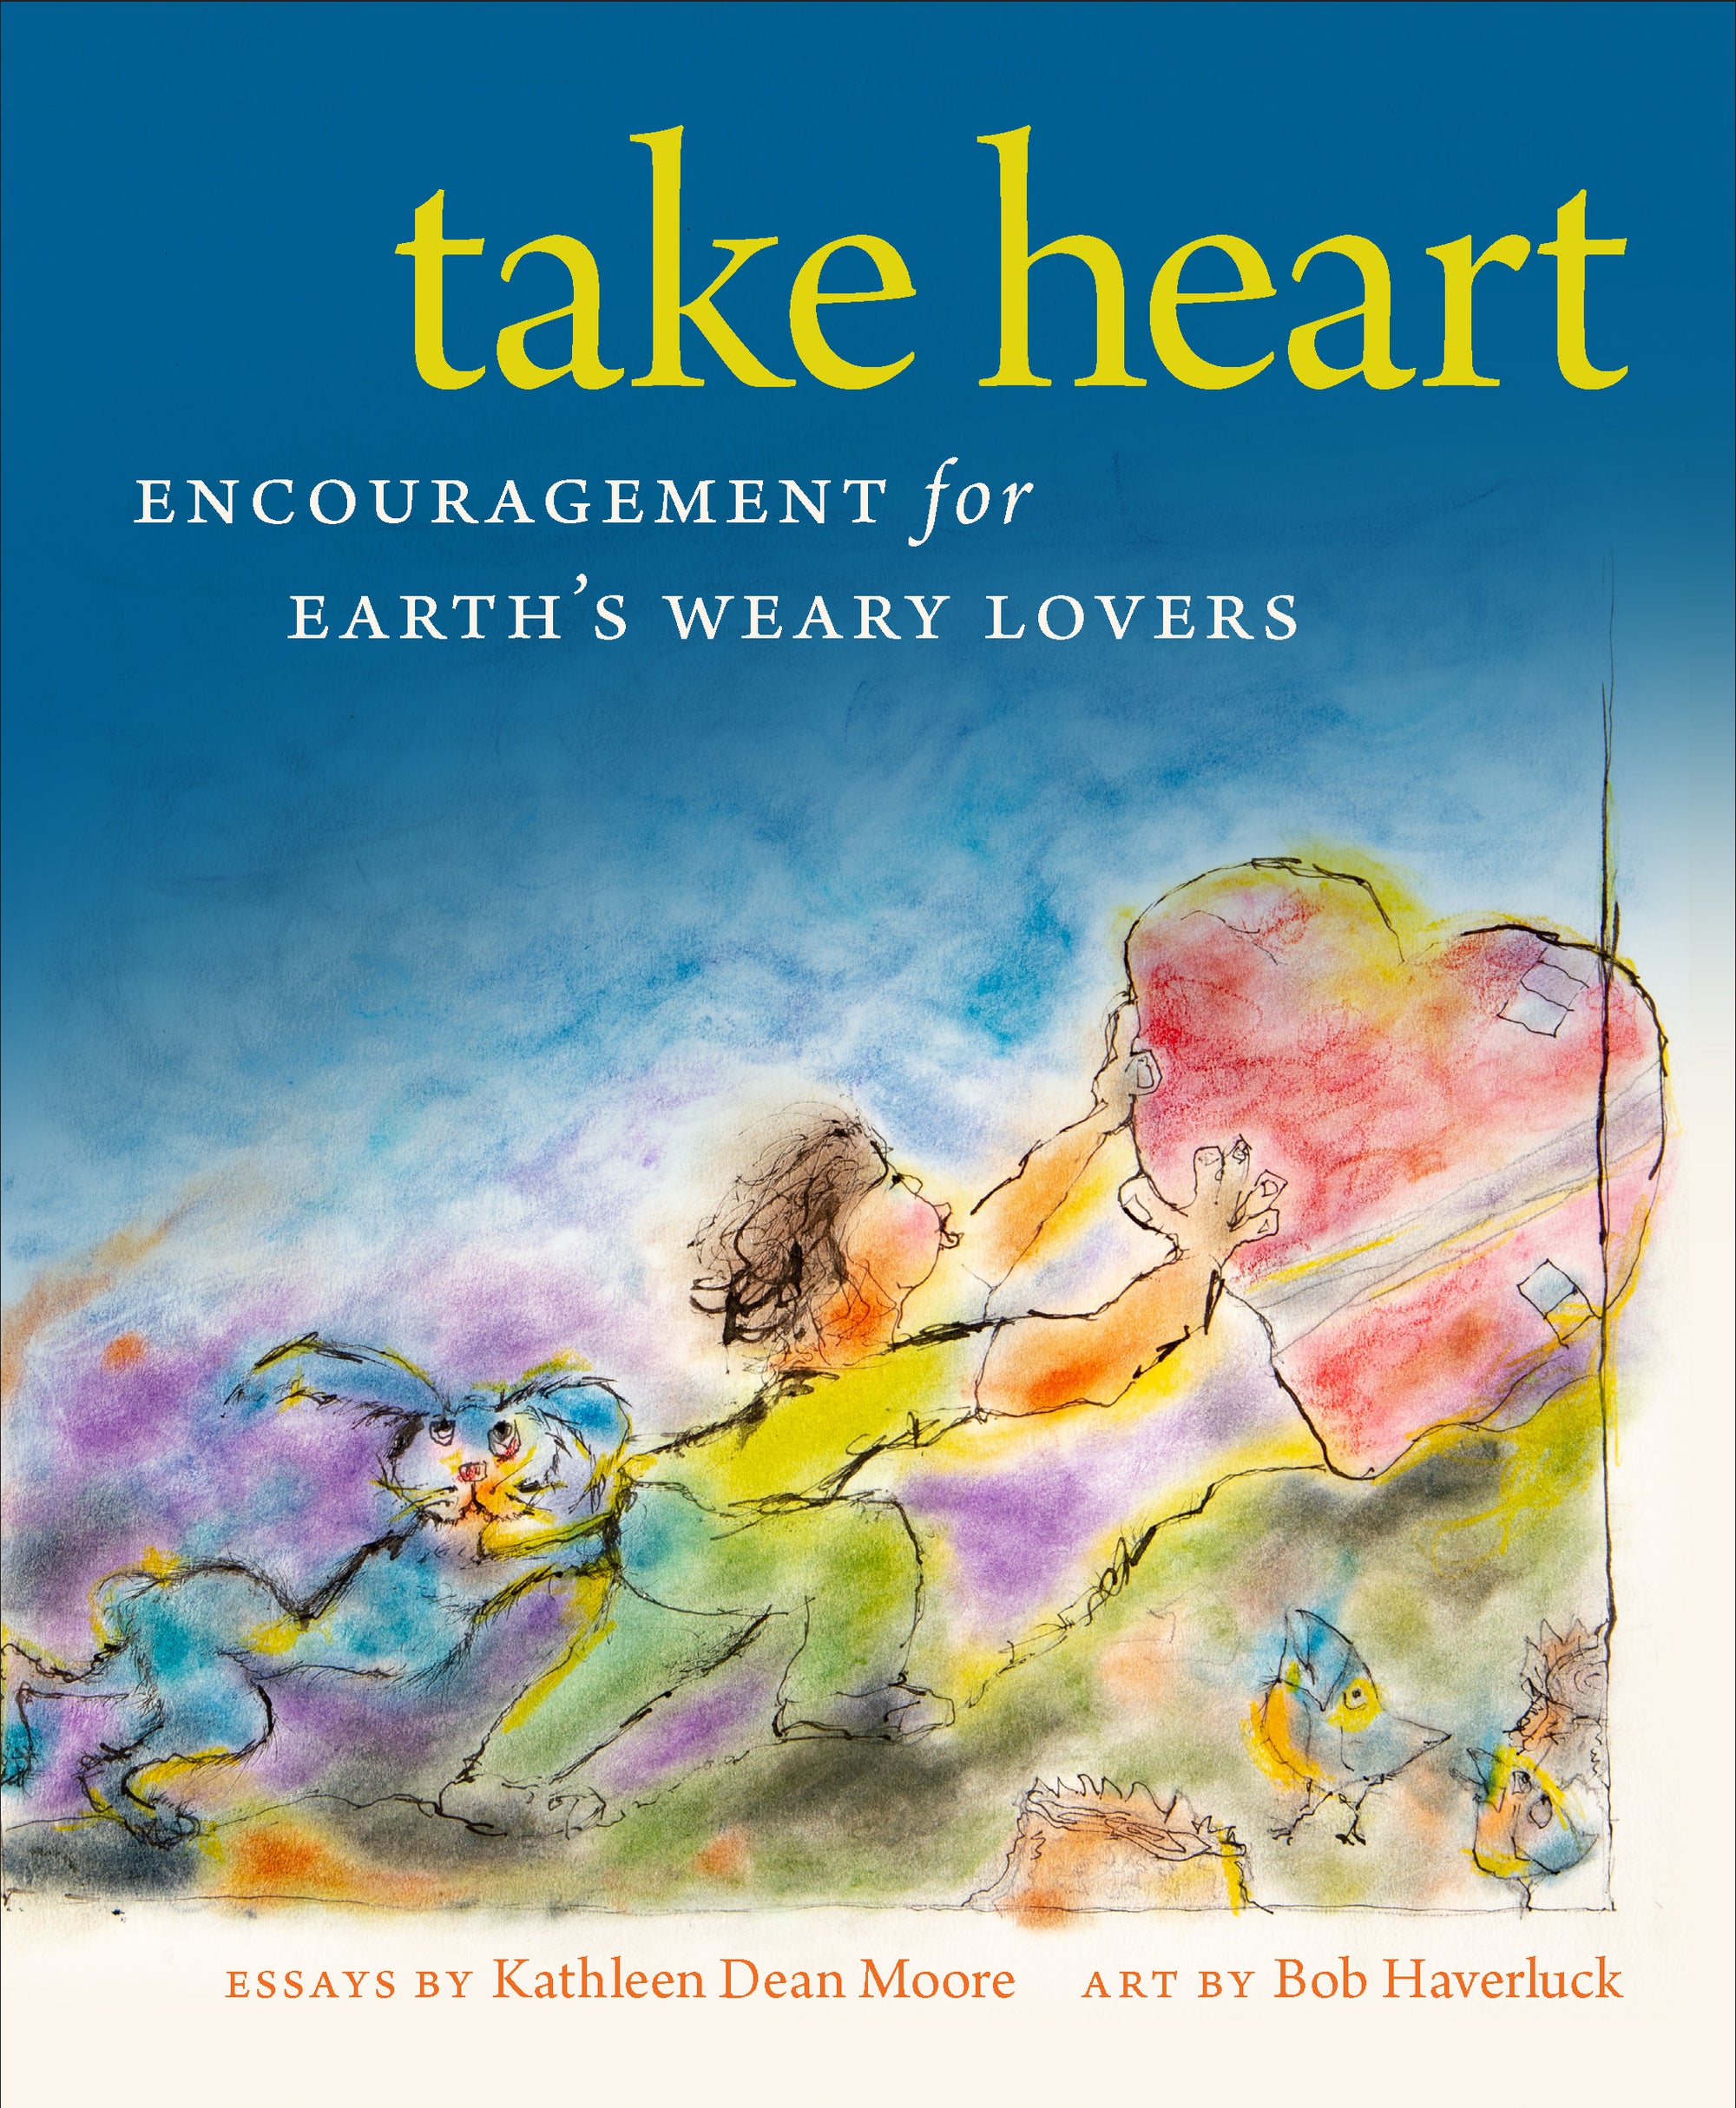 Take Heart - Encouragement for Earth's Weary Lovers